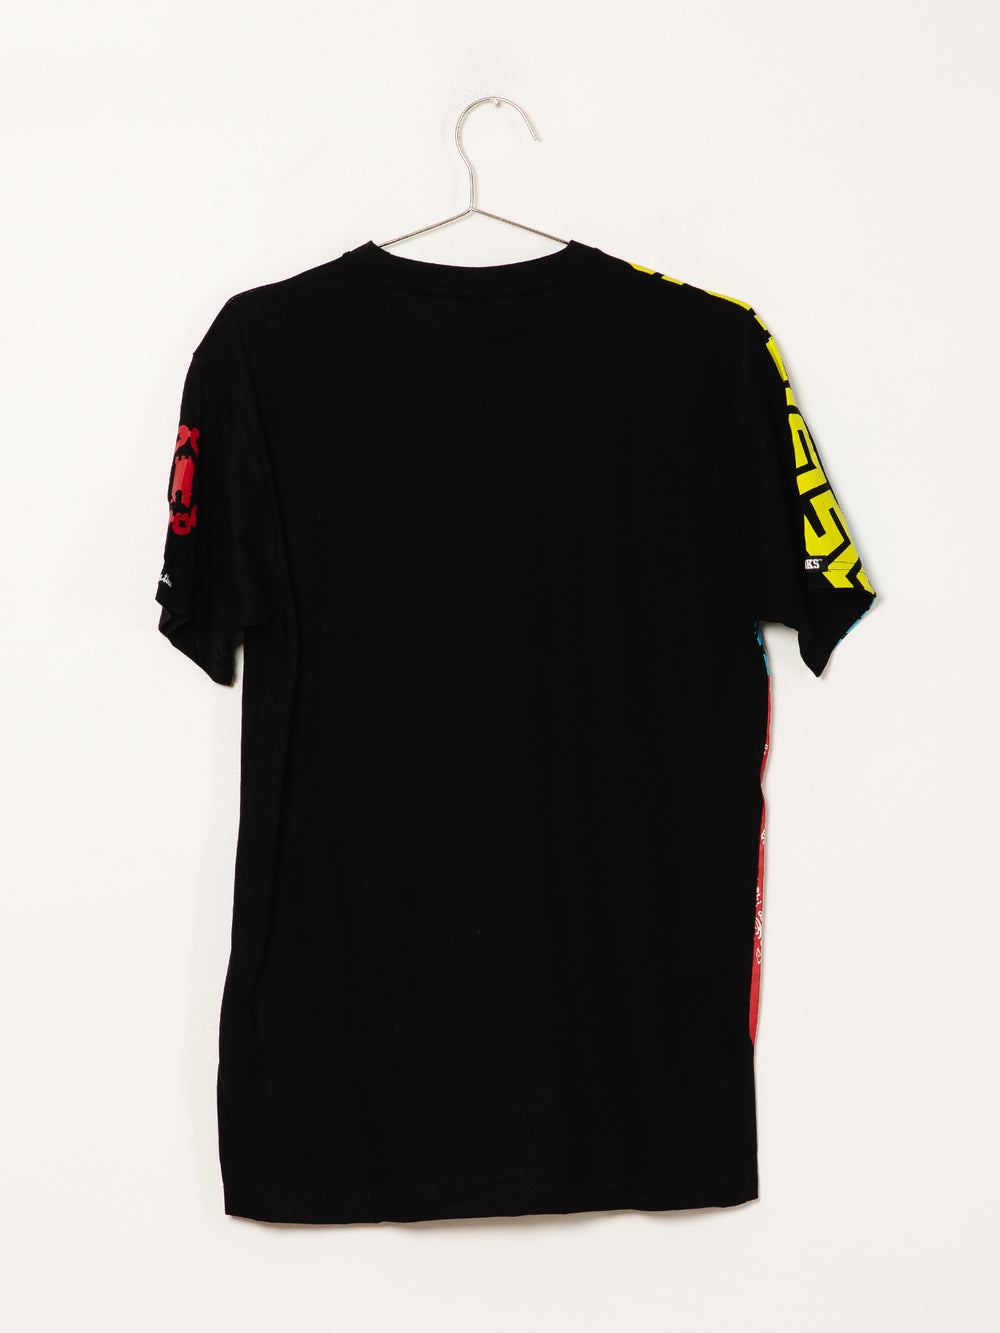 CROOKS & CASTLES GRECCO BANDITO PVER SIZED SHORT SLEEVE TEE - CLEARANCE